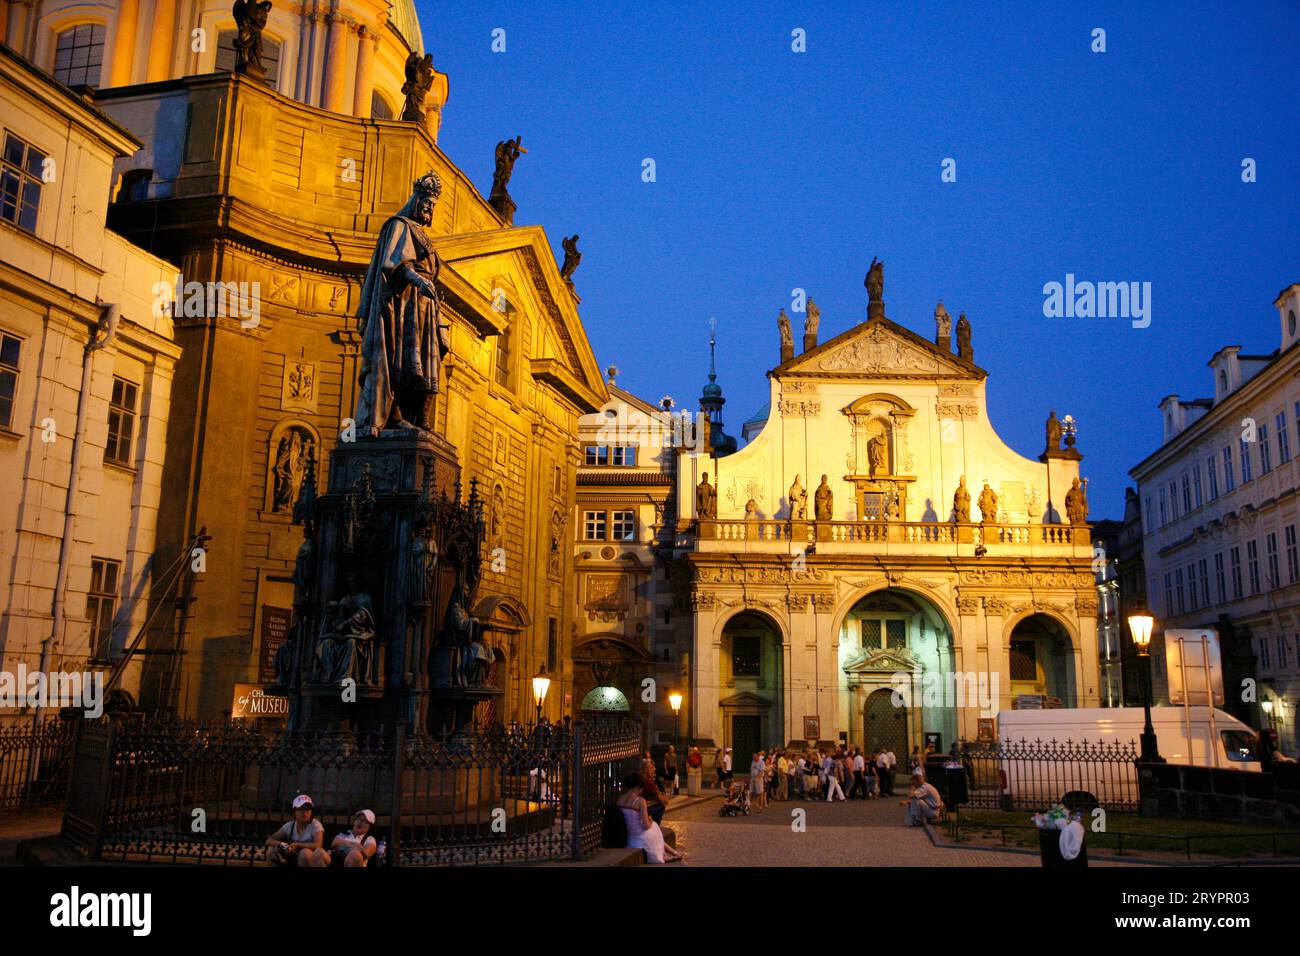 Krizovnicke Square with the St. Francis and Church of st. Salvator, Stare Mesto, Prague, Czech Republic. Stock Photo